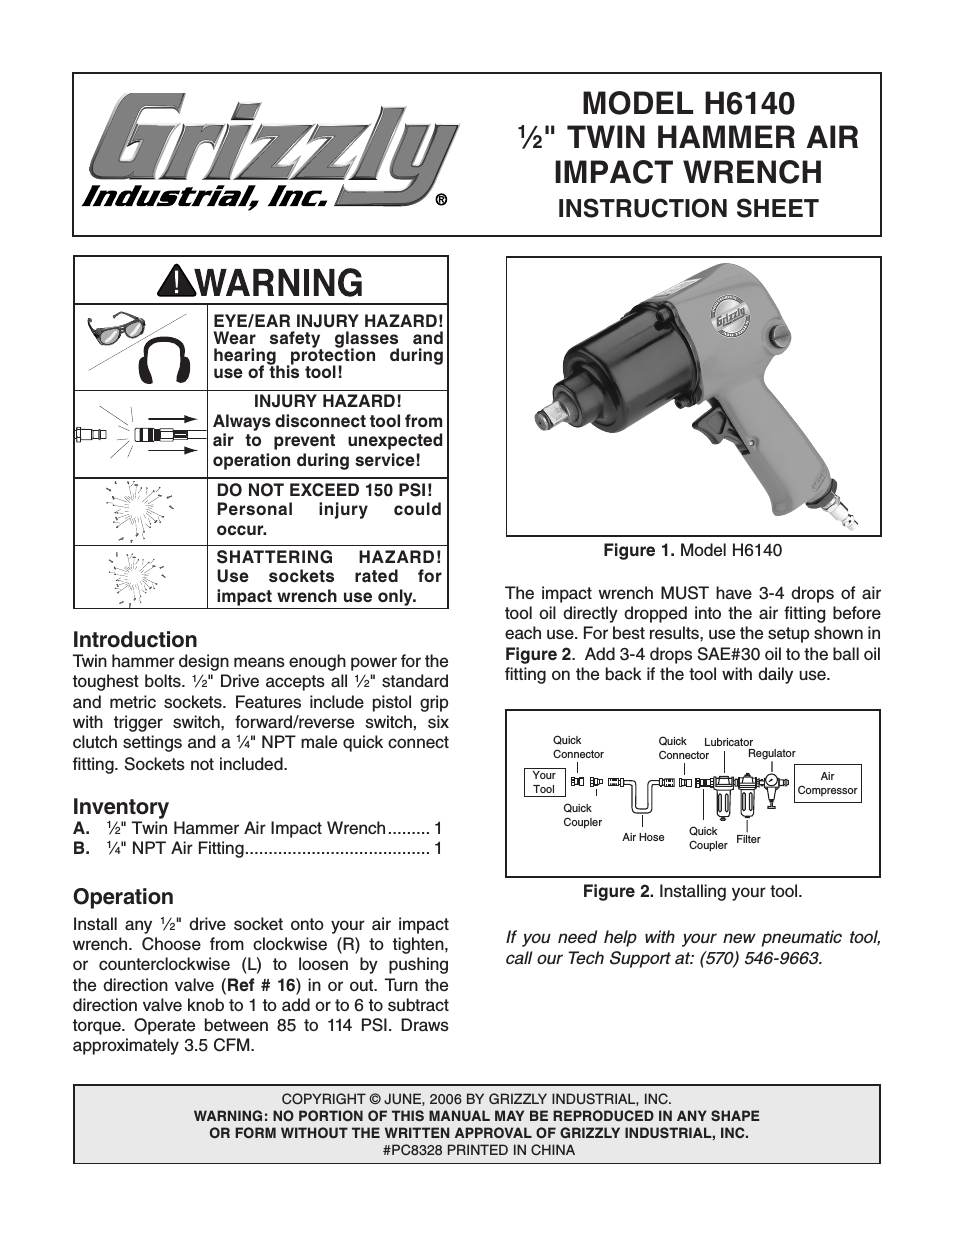 1/2" Twin Hammer Air Impact Wrench h6140